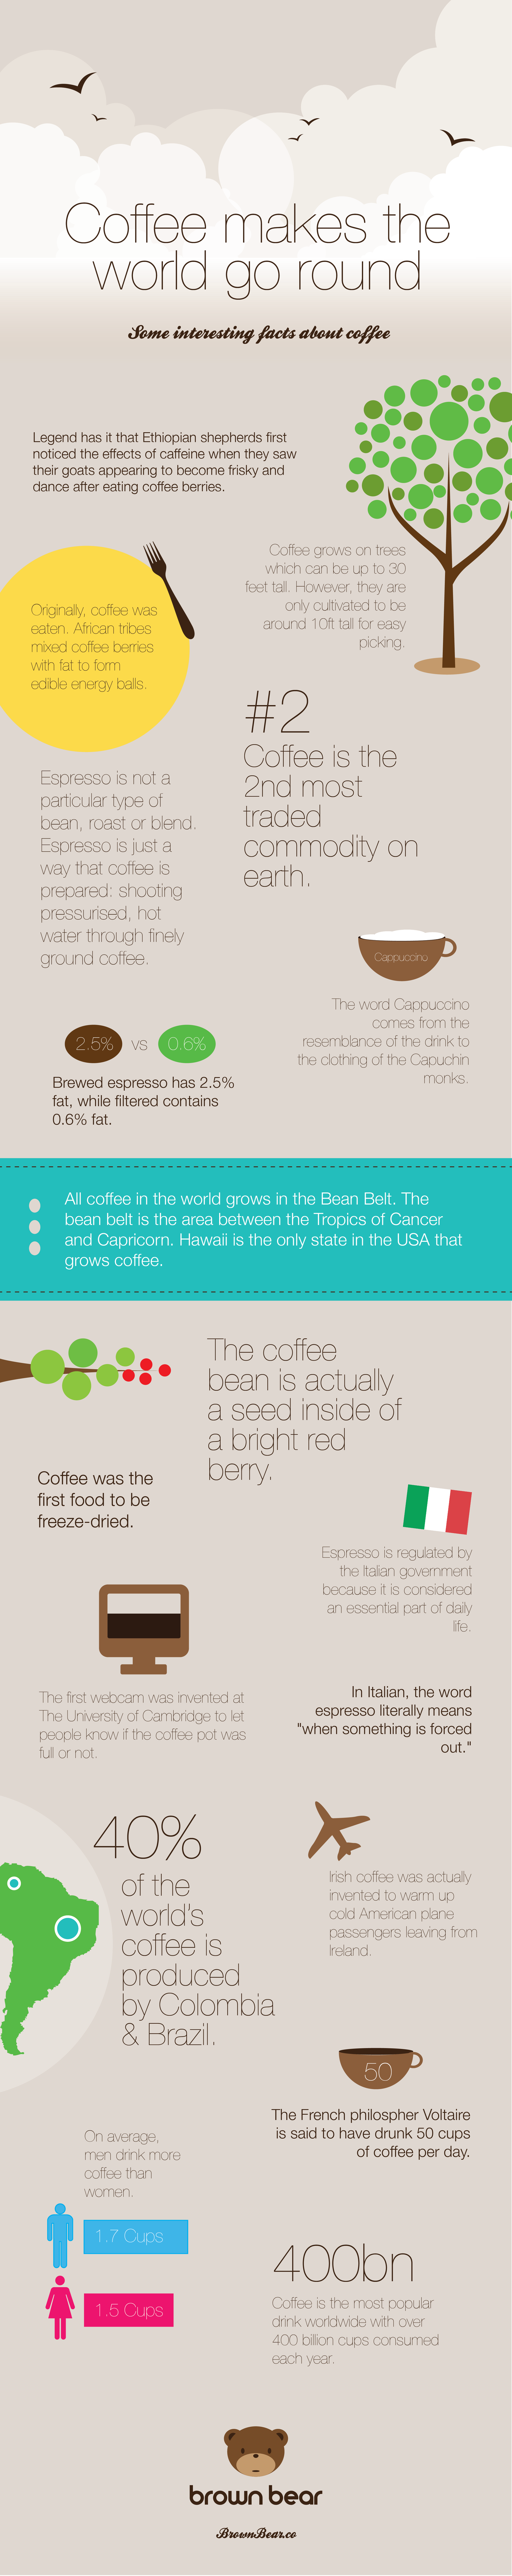 coffee facts infographic #coffeeinfographic | Coffee facts infographic, Coffee facts, Coffee ...